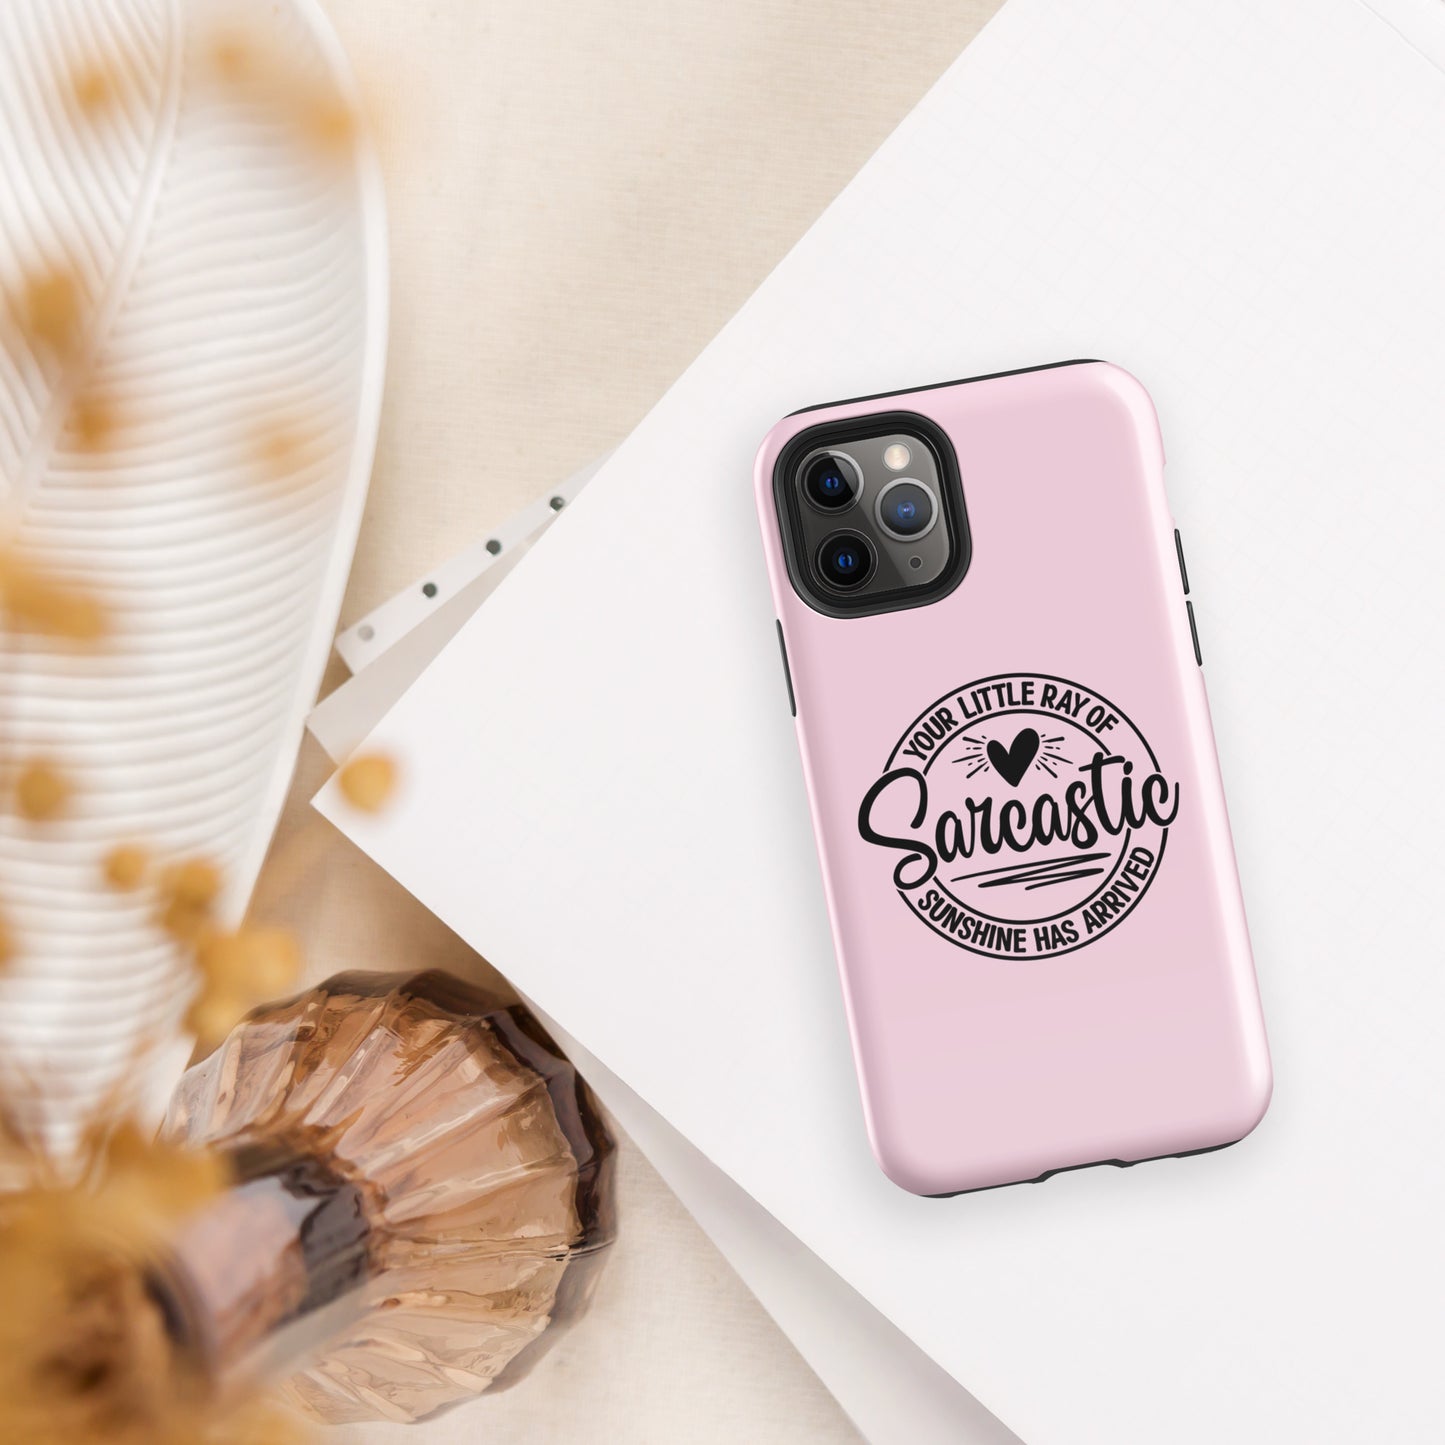 Your Little Ray of Sarcastic Sunshine: Humorous iPhone® Case